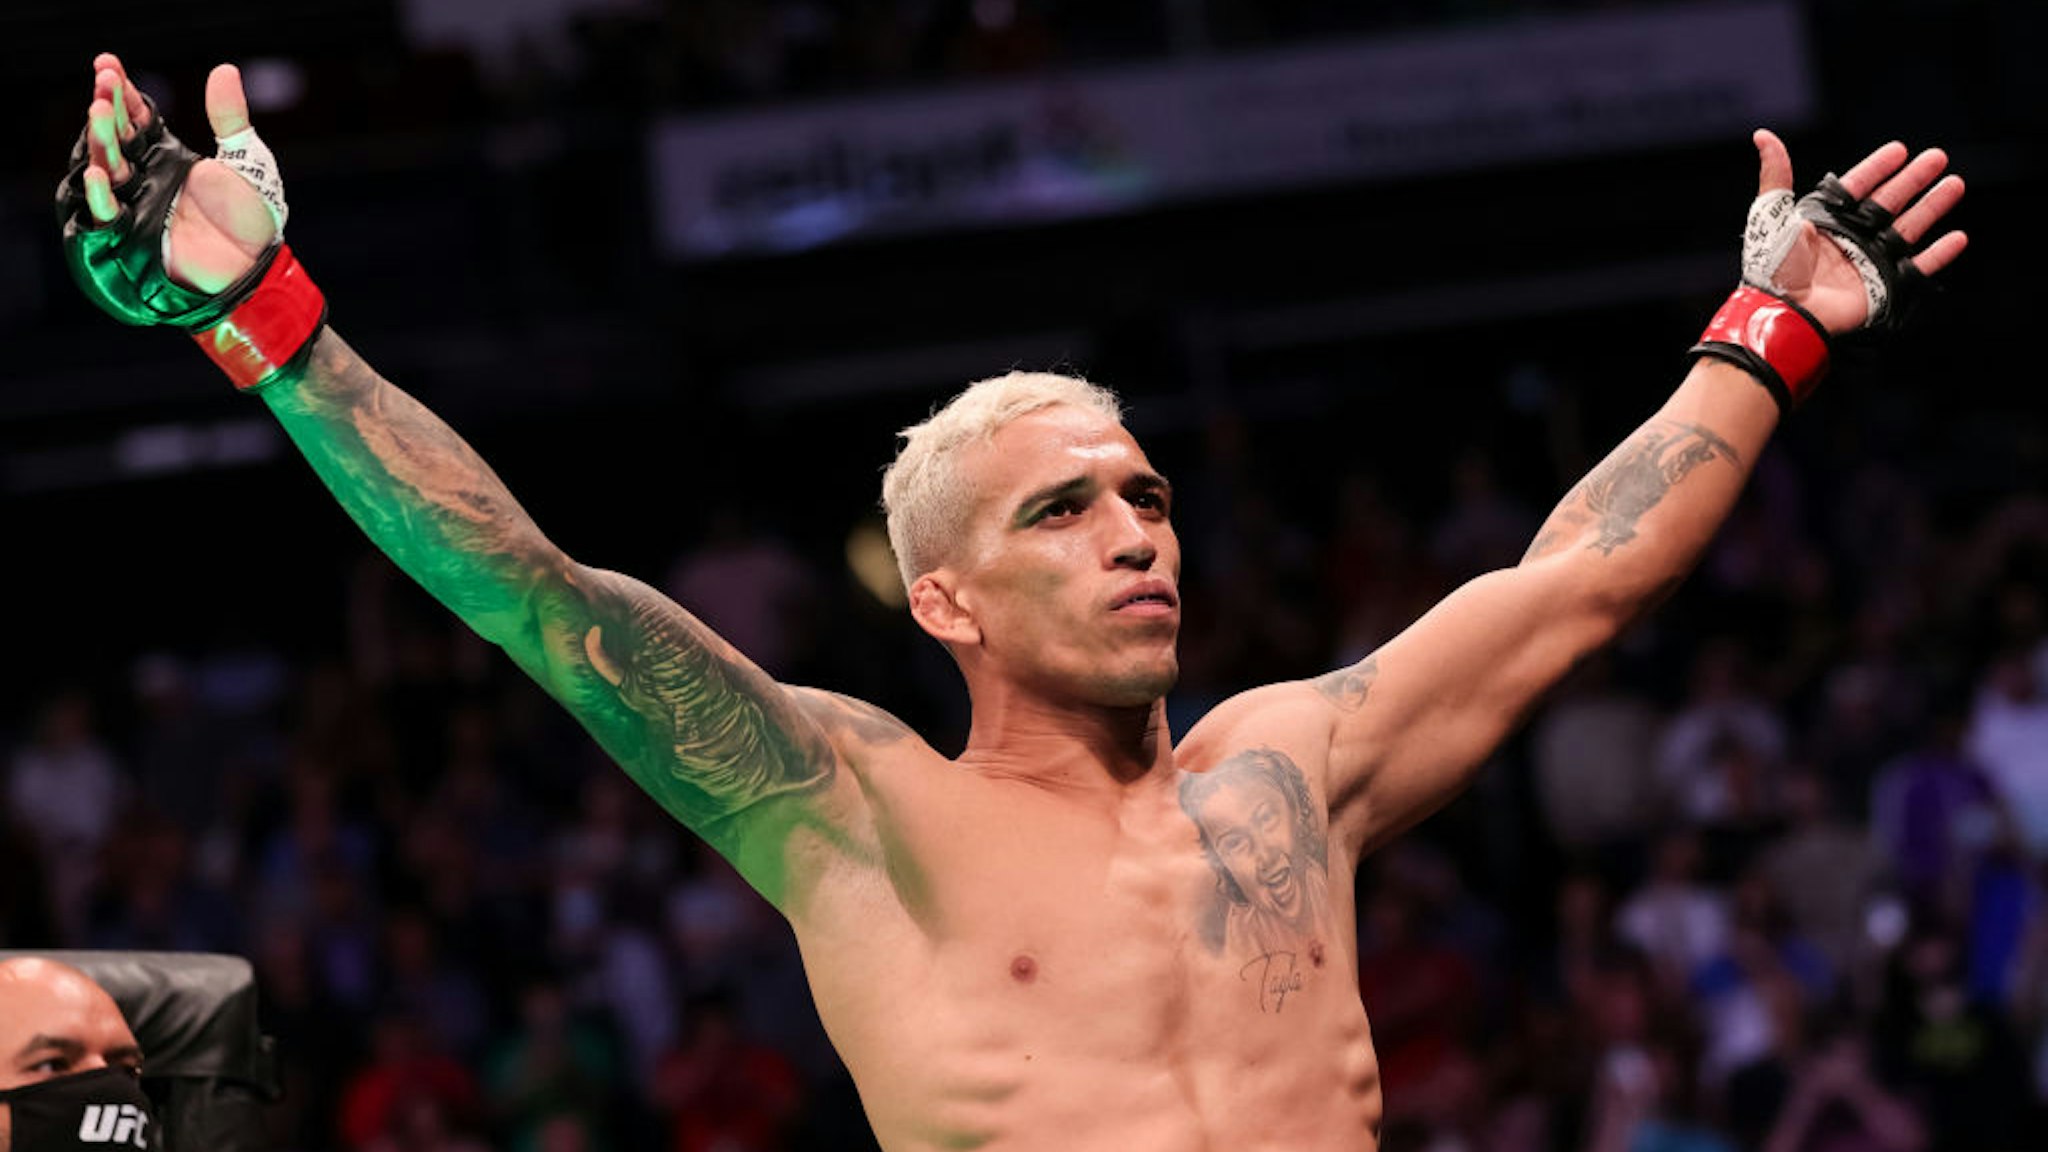 HOUSTON, TEXAS - MAY 15:Charles Oliveira of Brazil gestures to the crowd before facing Michael Chandler during their Championship Lightweight Bout at the UFC 262 event at Toyota Center on May 15, 2021 in Houston, Texas. (Photo by Carmen Mandato/Getty Images)